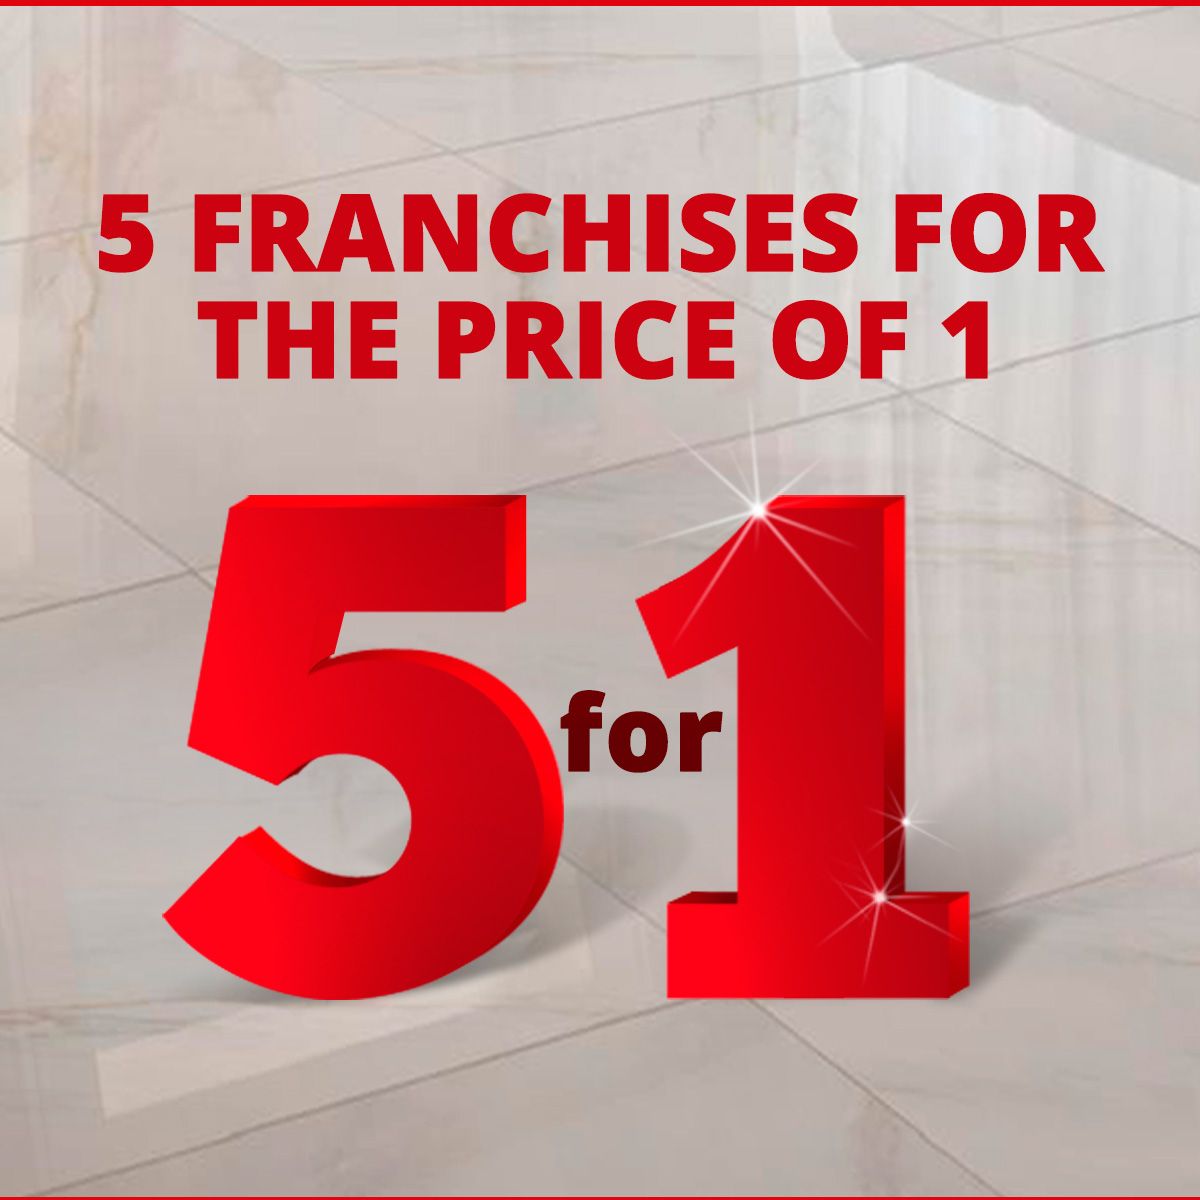 5 Franchises for the Price of 1